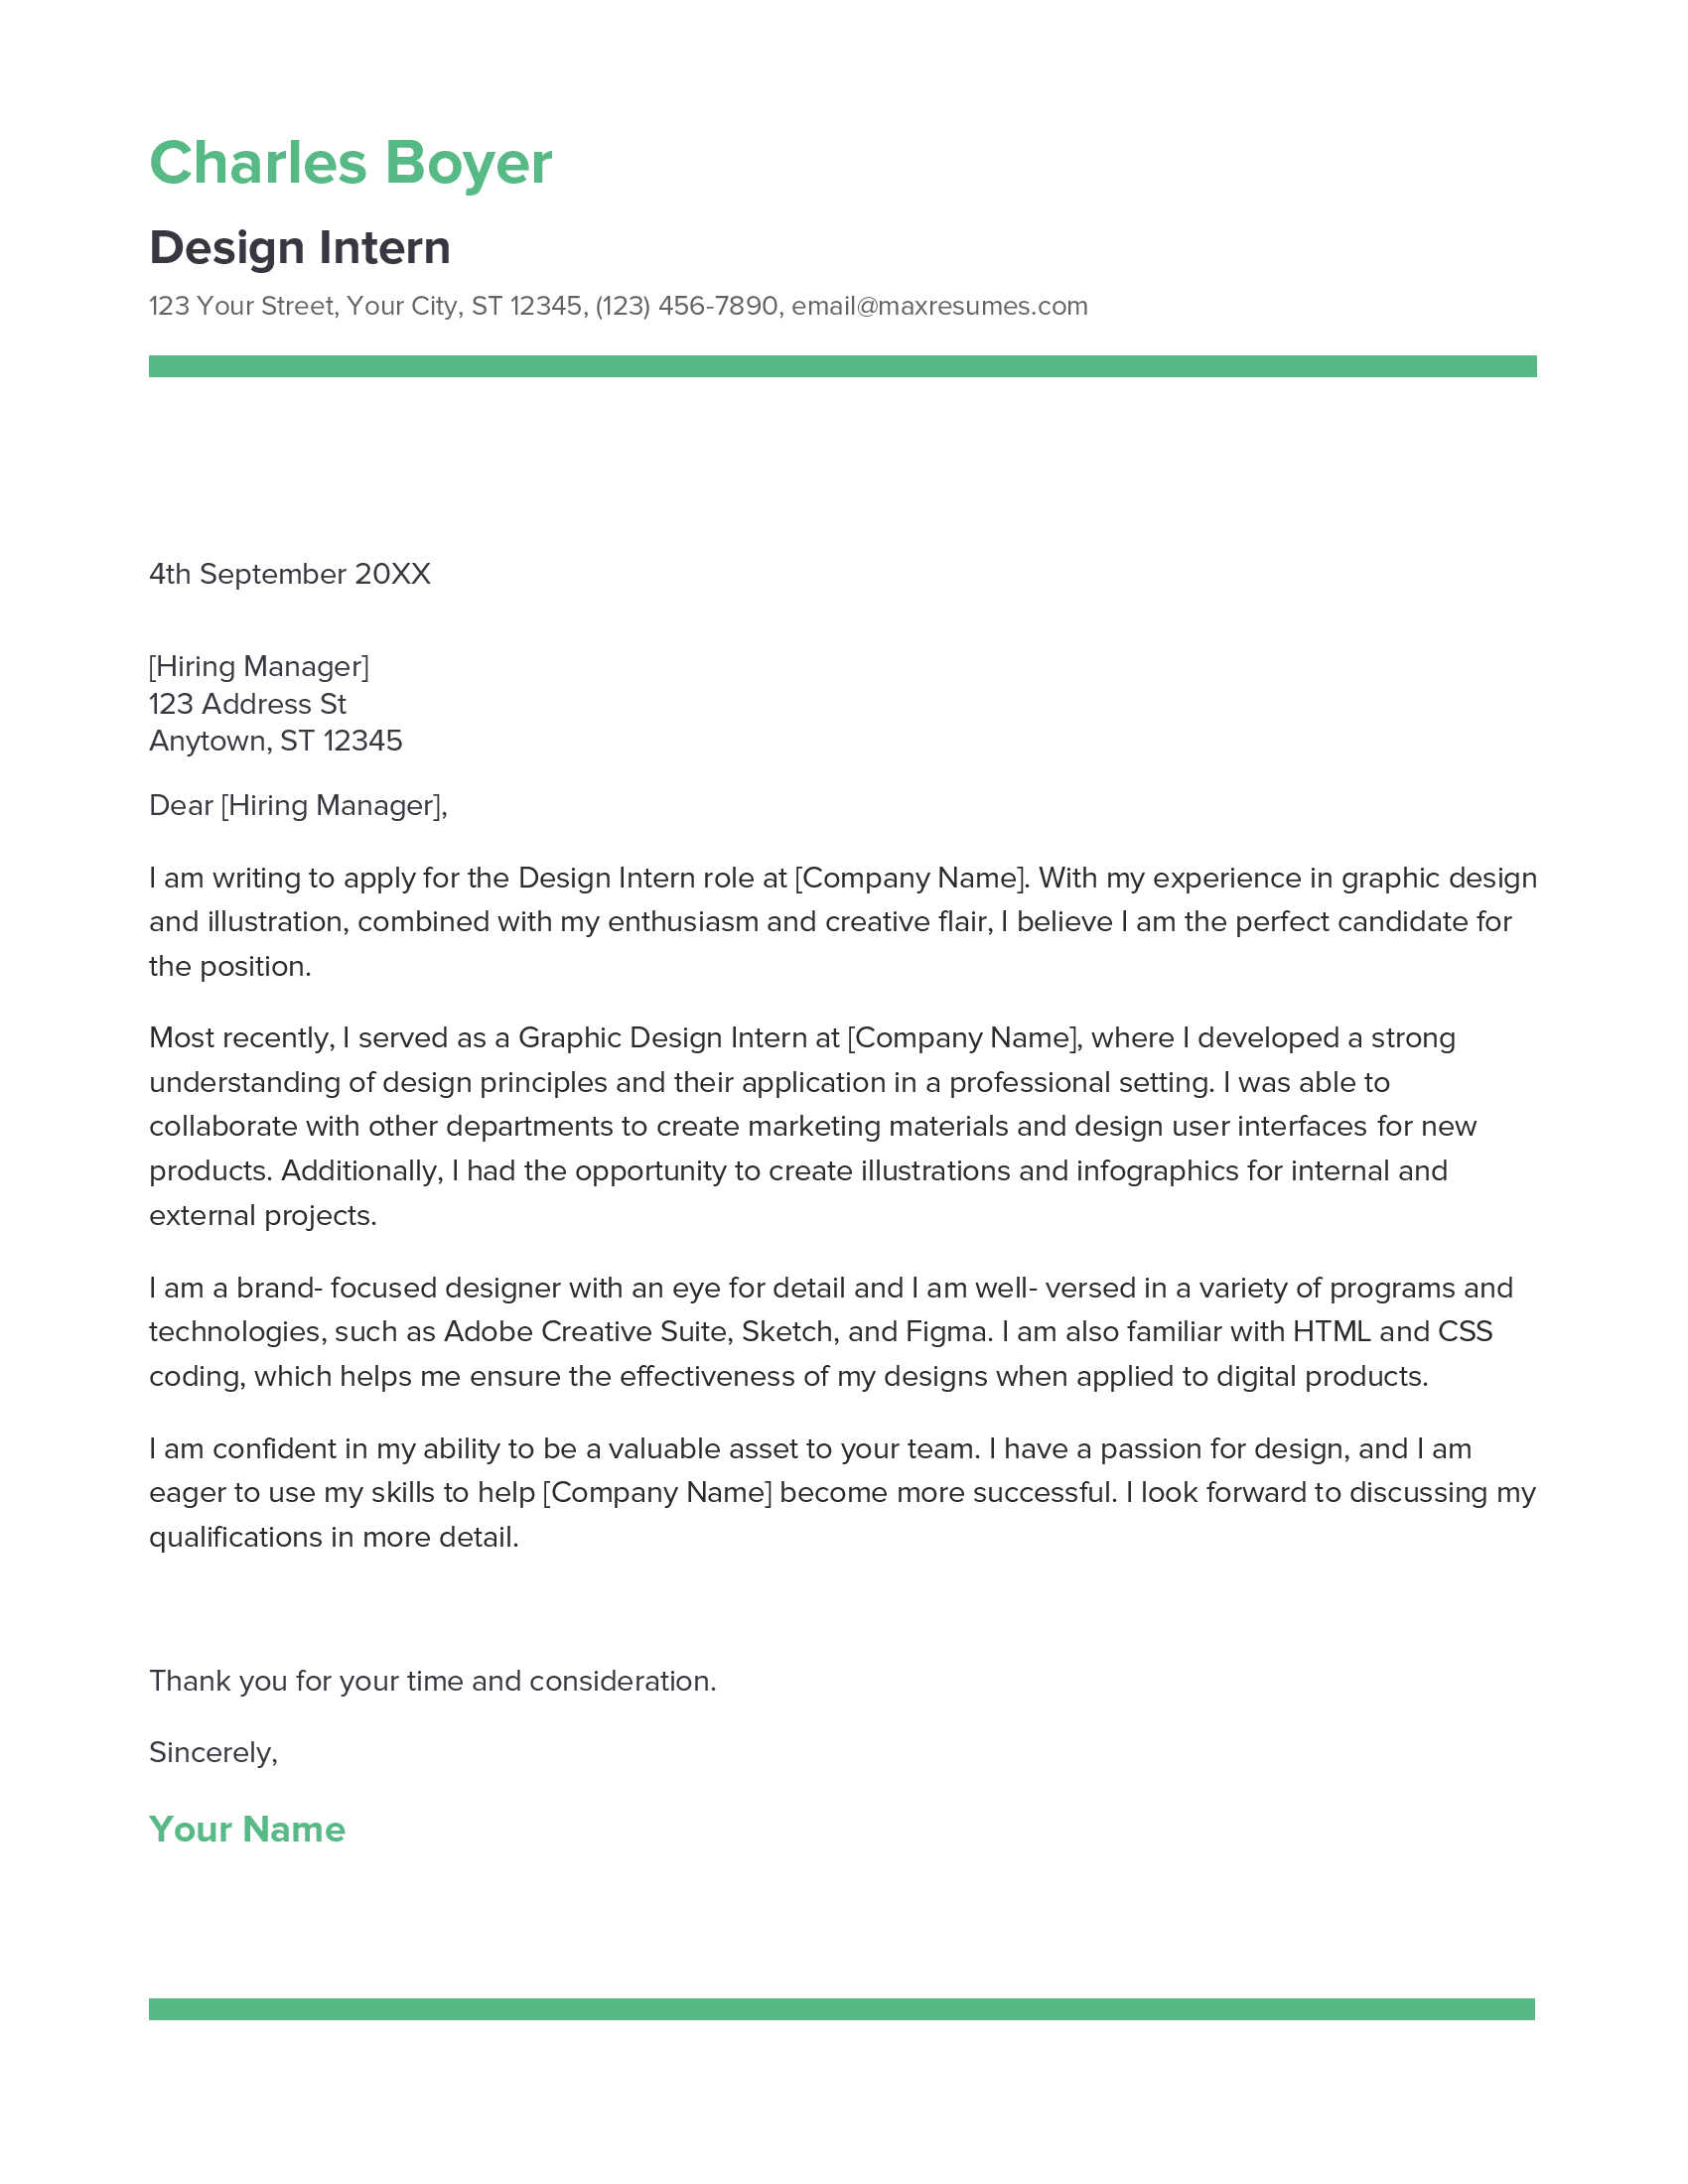 Design Intern Cover Letter Example